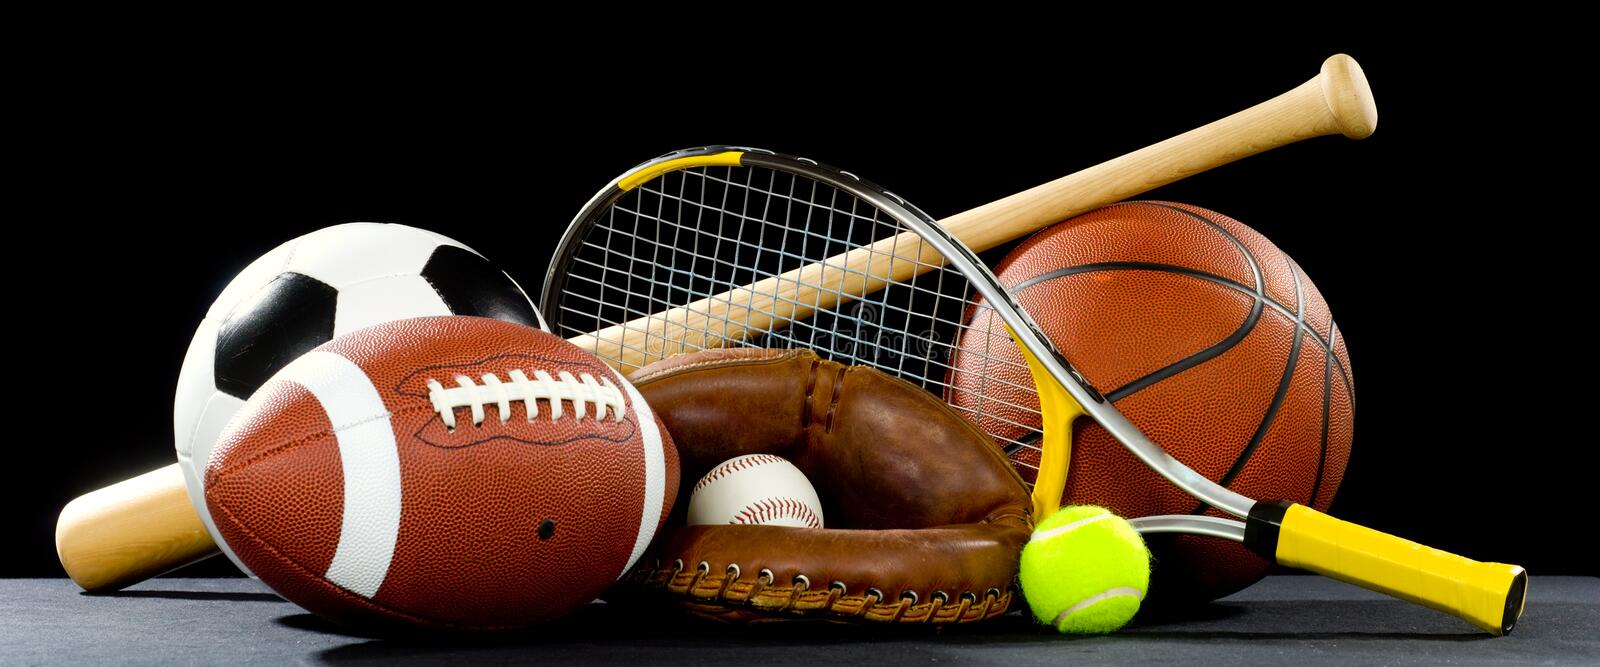 Beaufort County Parks and Recreation Sponsoring Free Sports Camps for Seabrook and St. Helena Communities